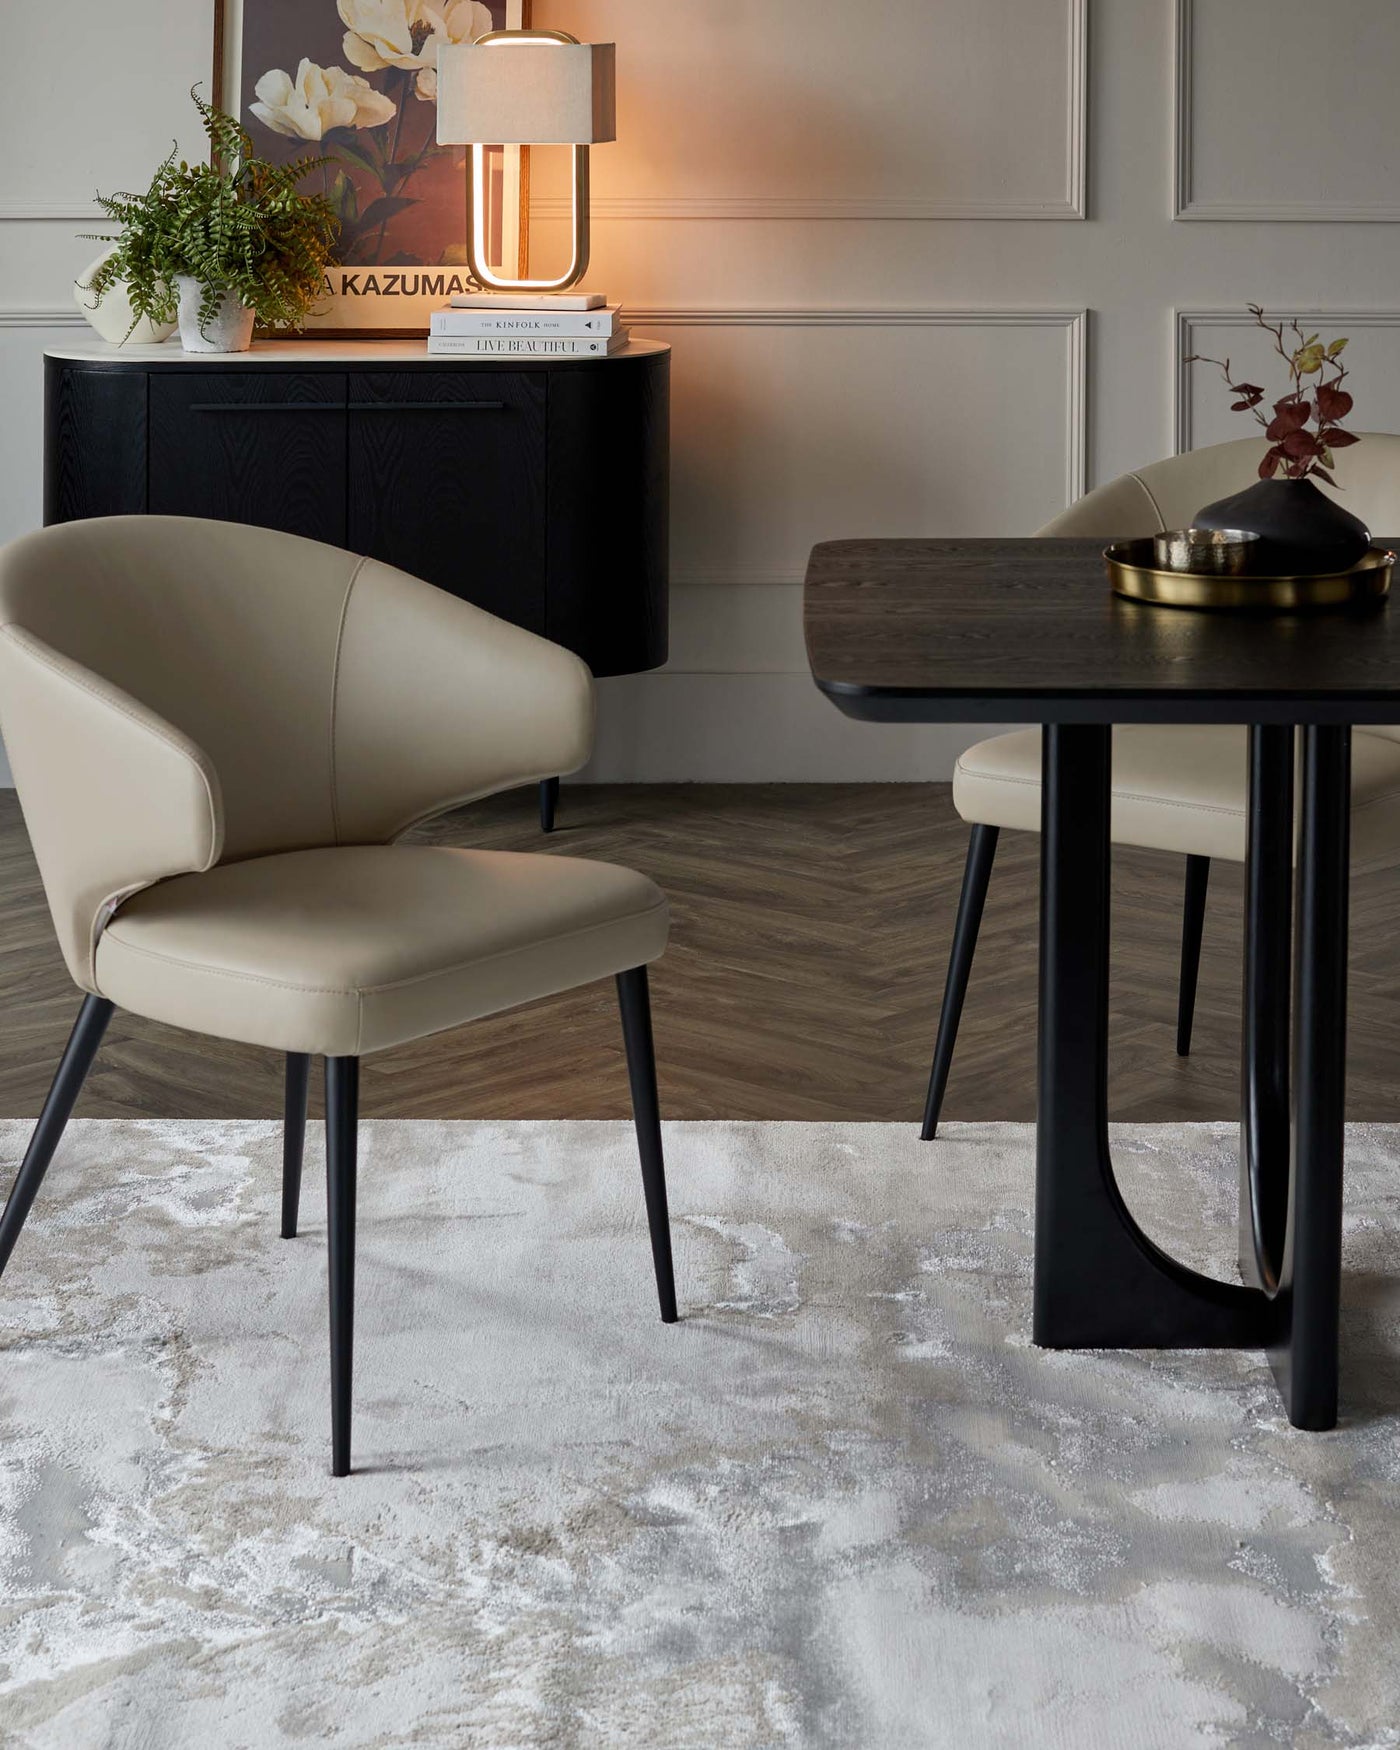 Elegant modern furniture set featuring a beige upholstered chair with a curved back and black tapered legs, a matching dark wooden table with black legs, and a textured black sideboard against a panelled wall, complemented by a white patterned area rug. A contemporary lamp, decorative books, and a brass tray with accessories adorn the sideboard, adding a sophisticated touch to the decor.